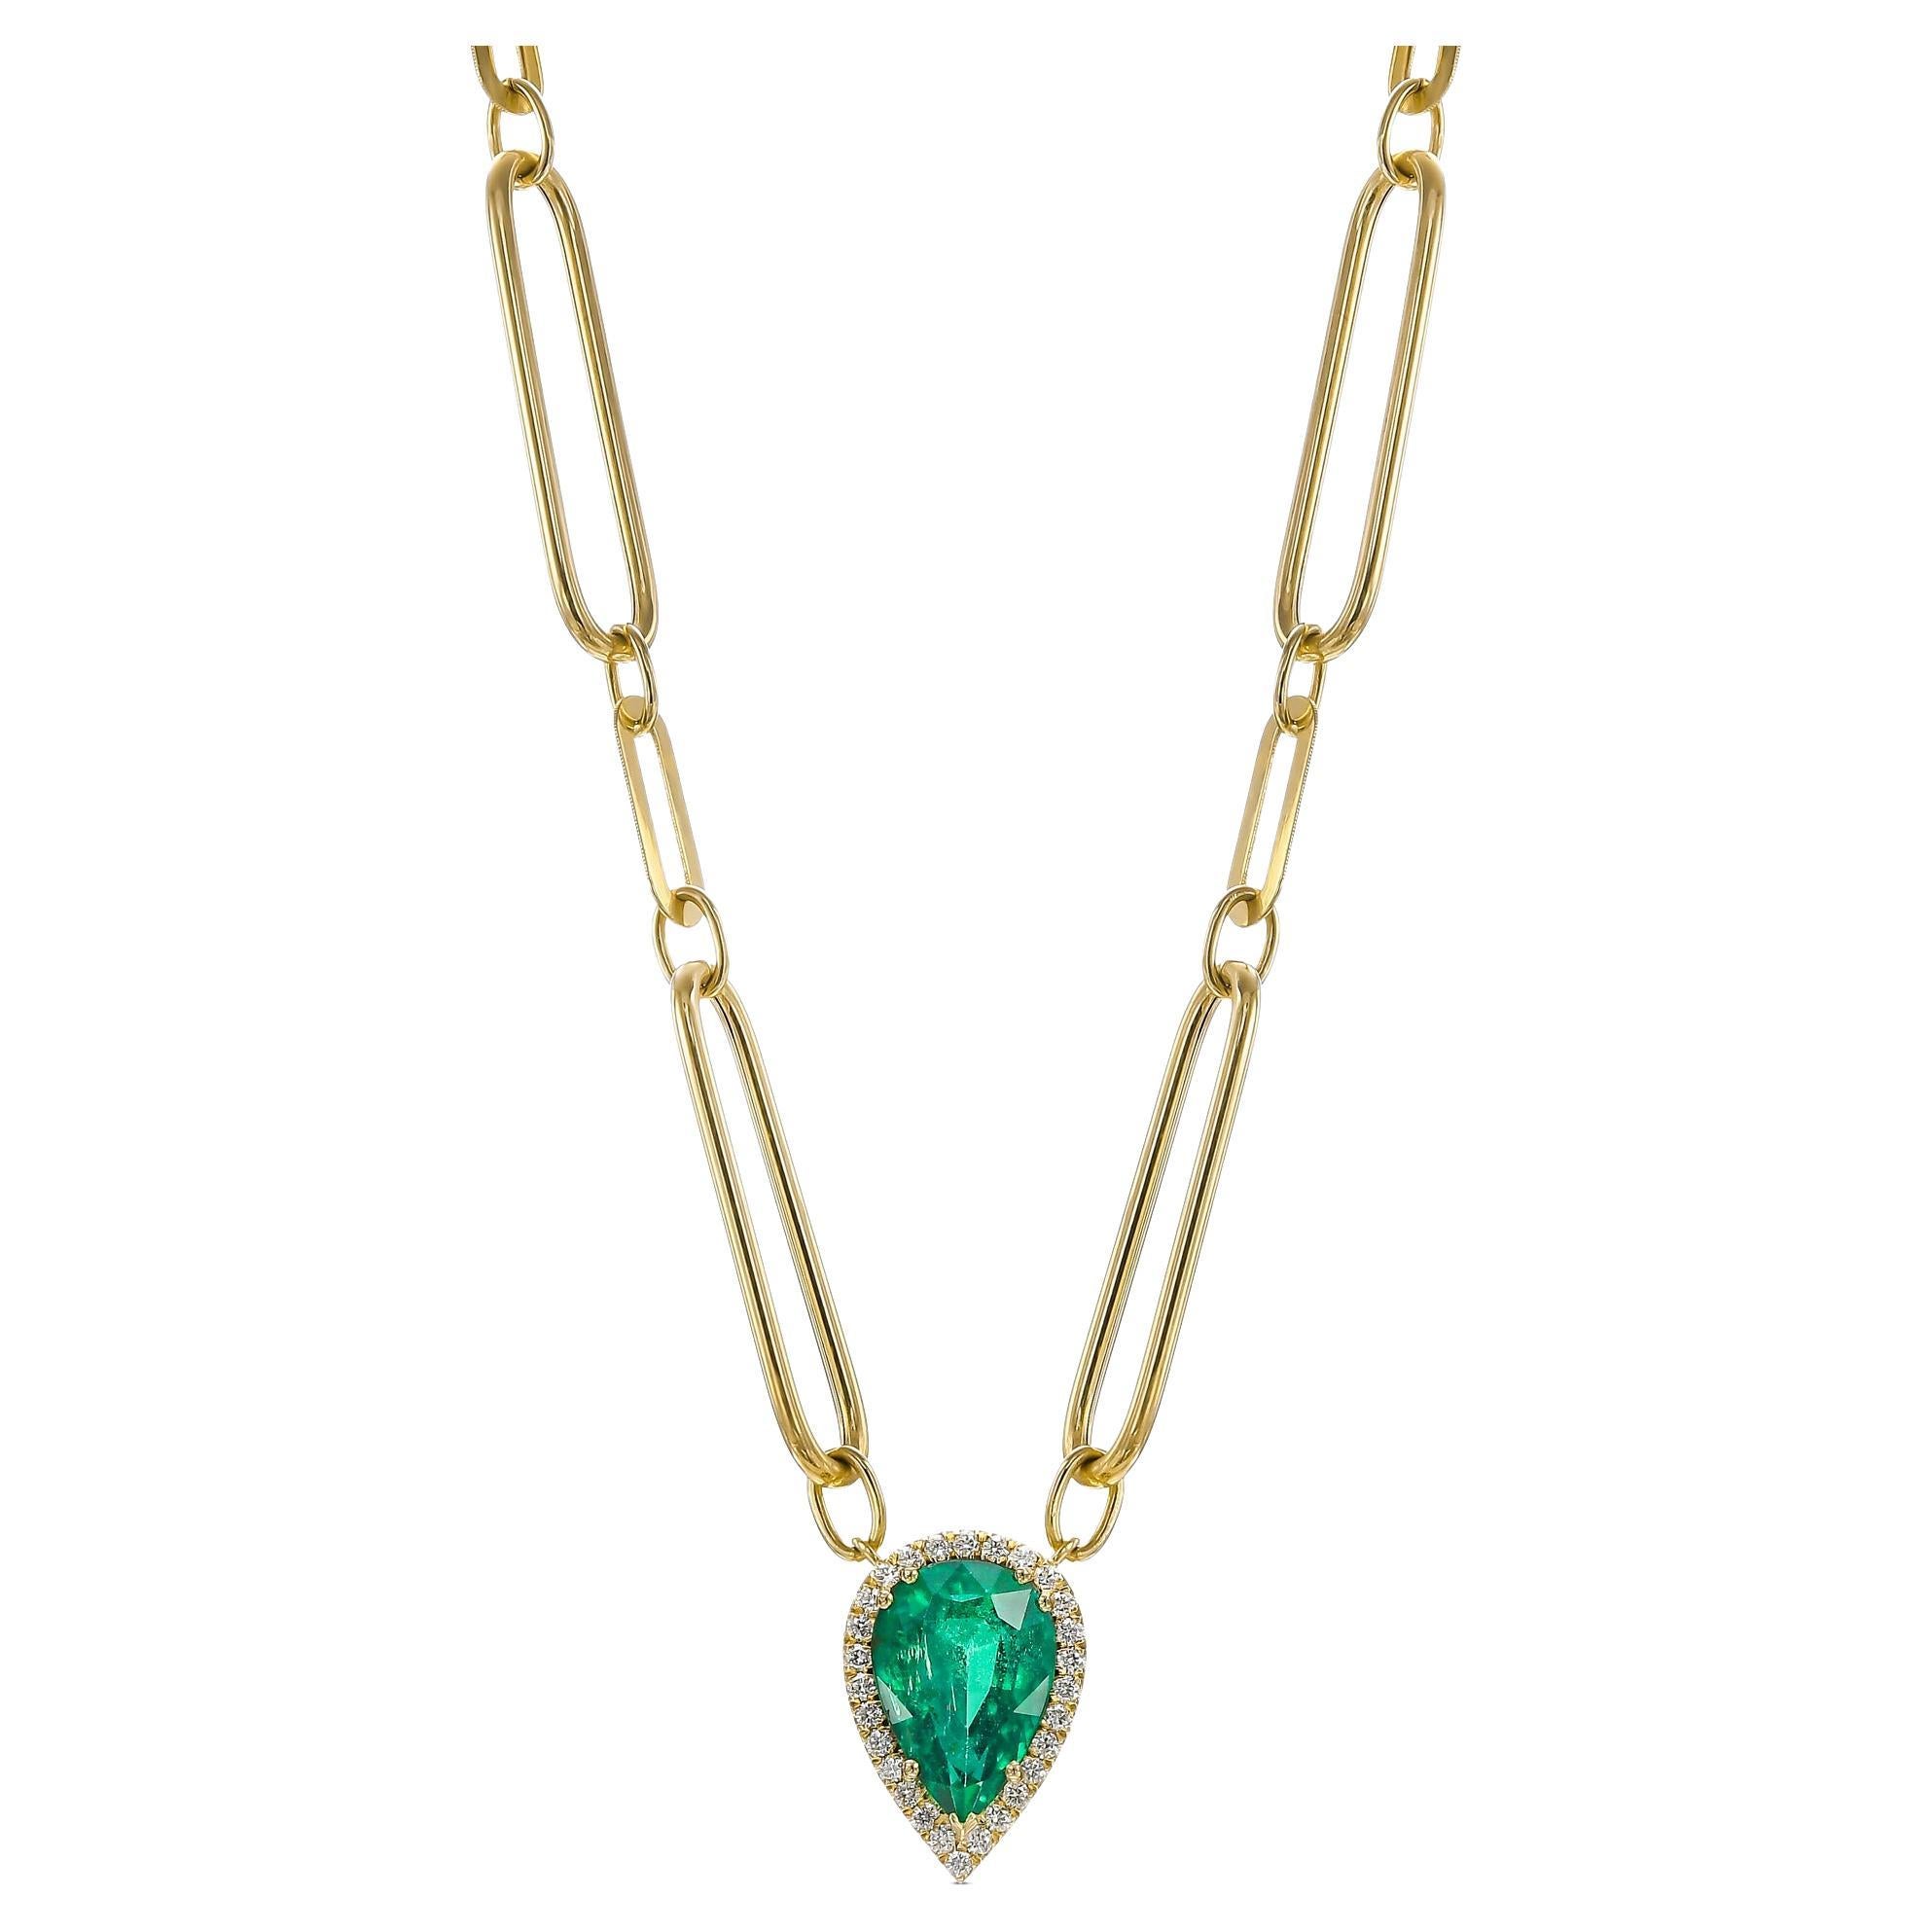 GIA Certified 3.59 Carat Pear Shape Emerald Necklace with Diamonds For Sale